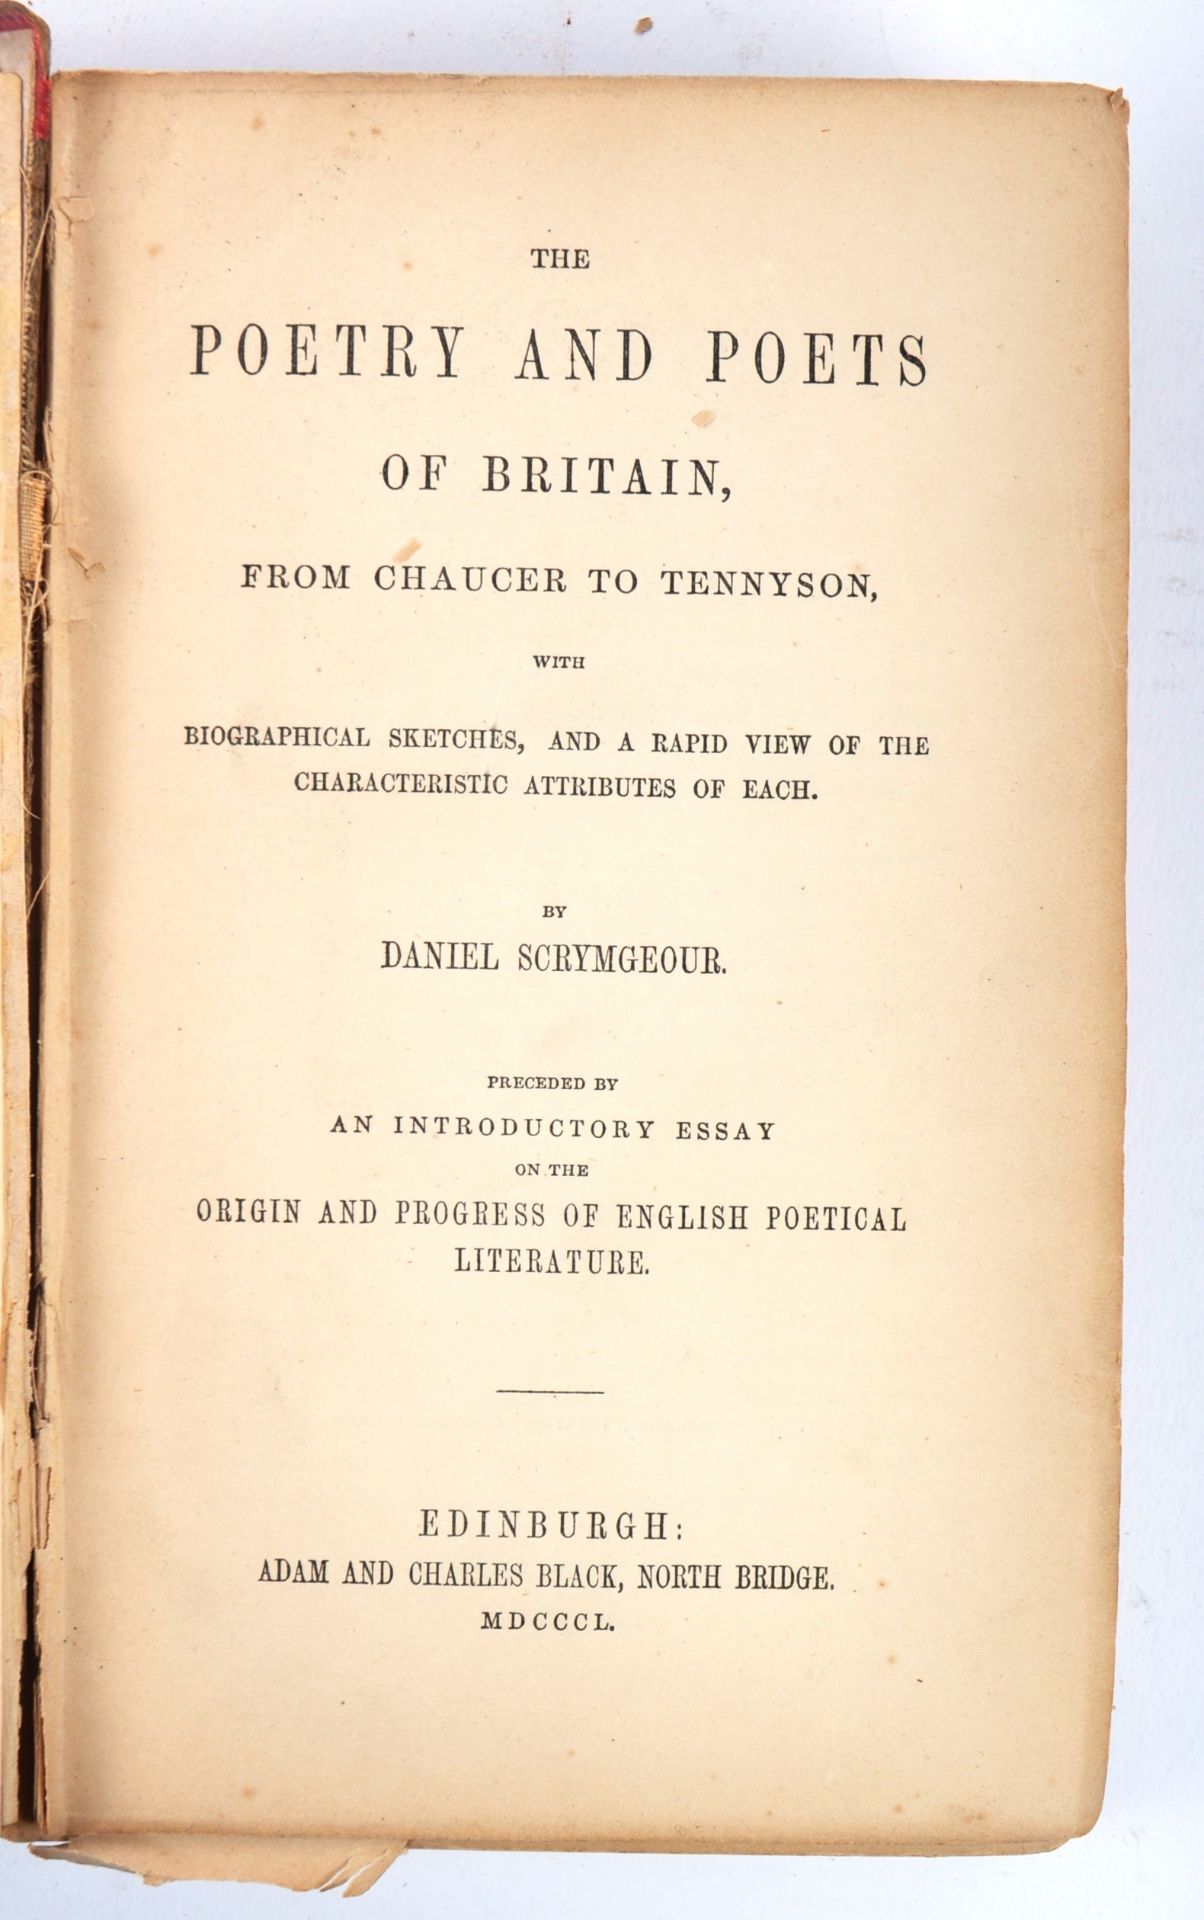 COLLECTION OF BOOKS 19TH / 20 TH CENTURY POETS - Image 5 of 5